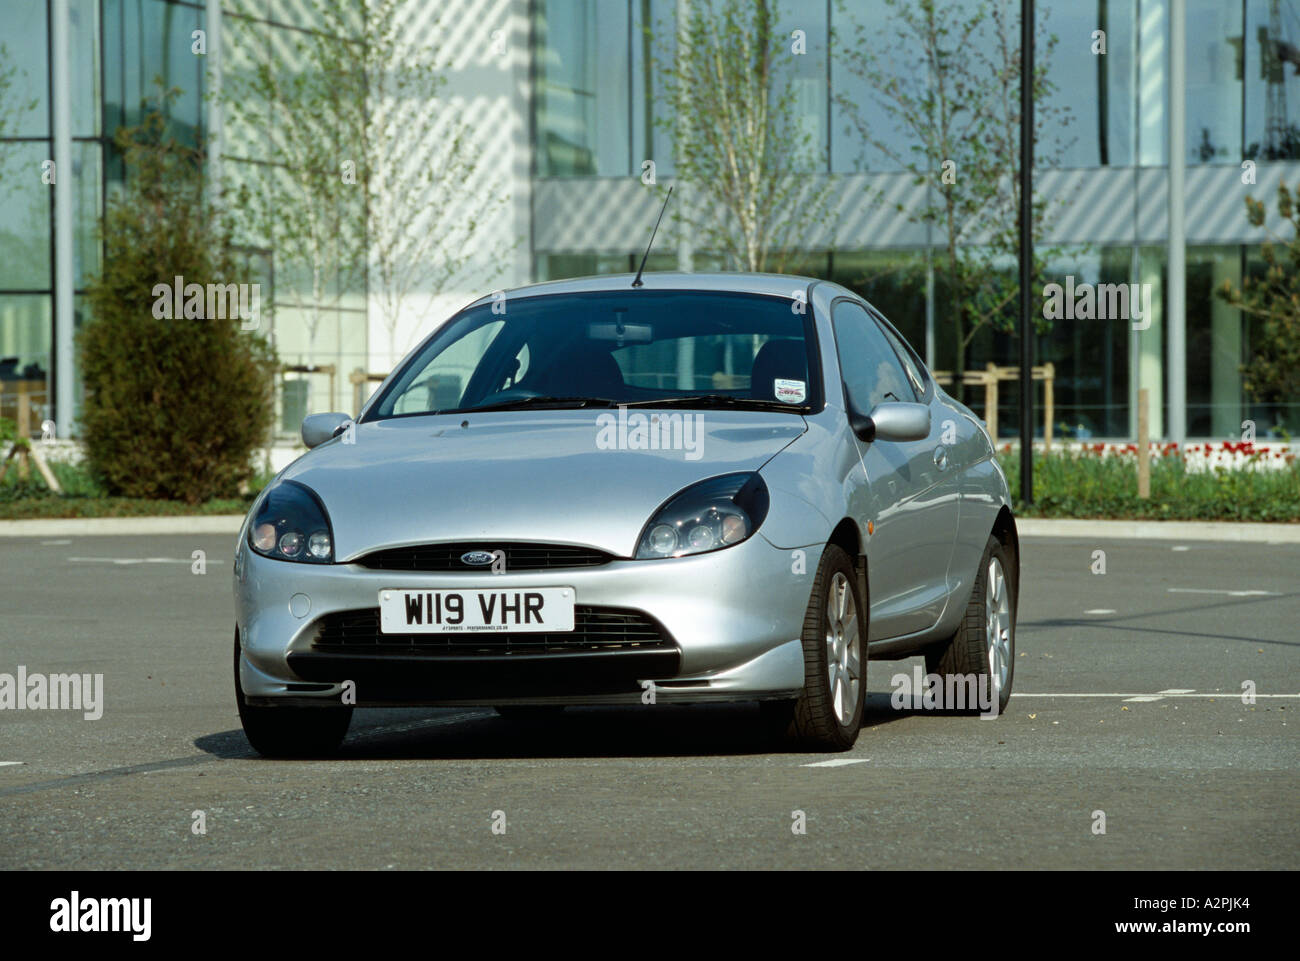 Ford Puma High Resolution Stock Photography and Images - Alamy